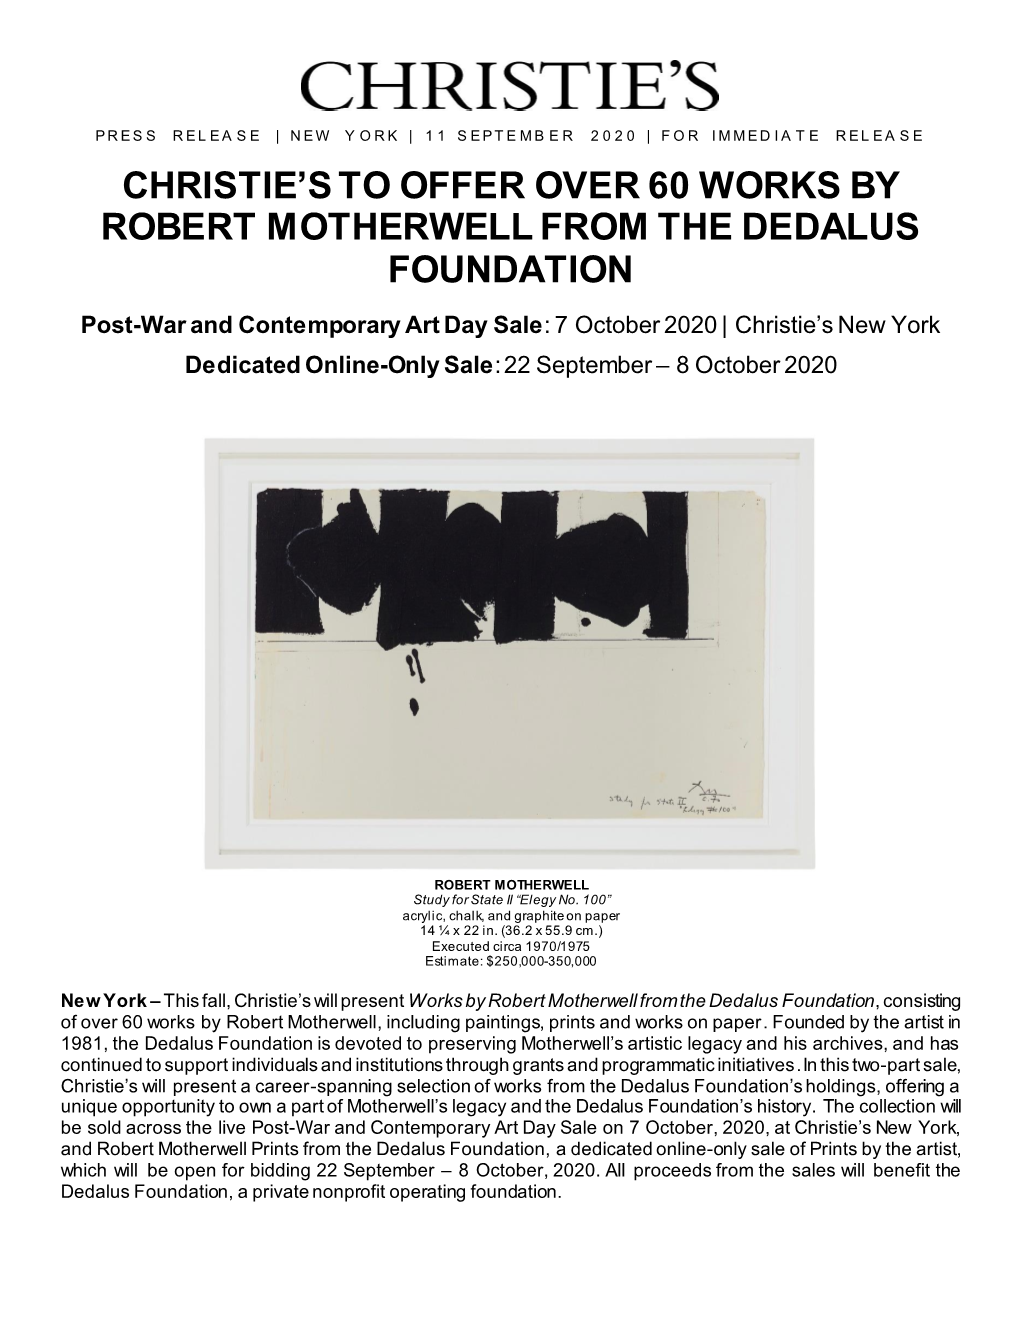 Christie's to Offer Over 60 Works by Robert